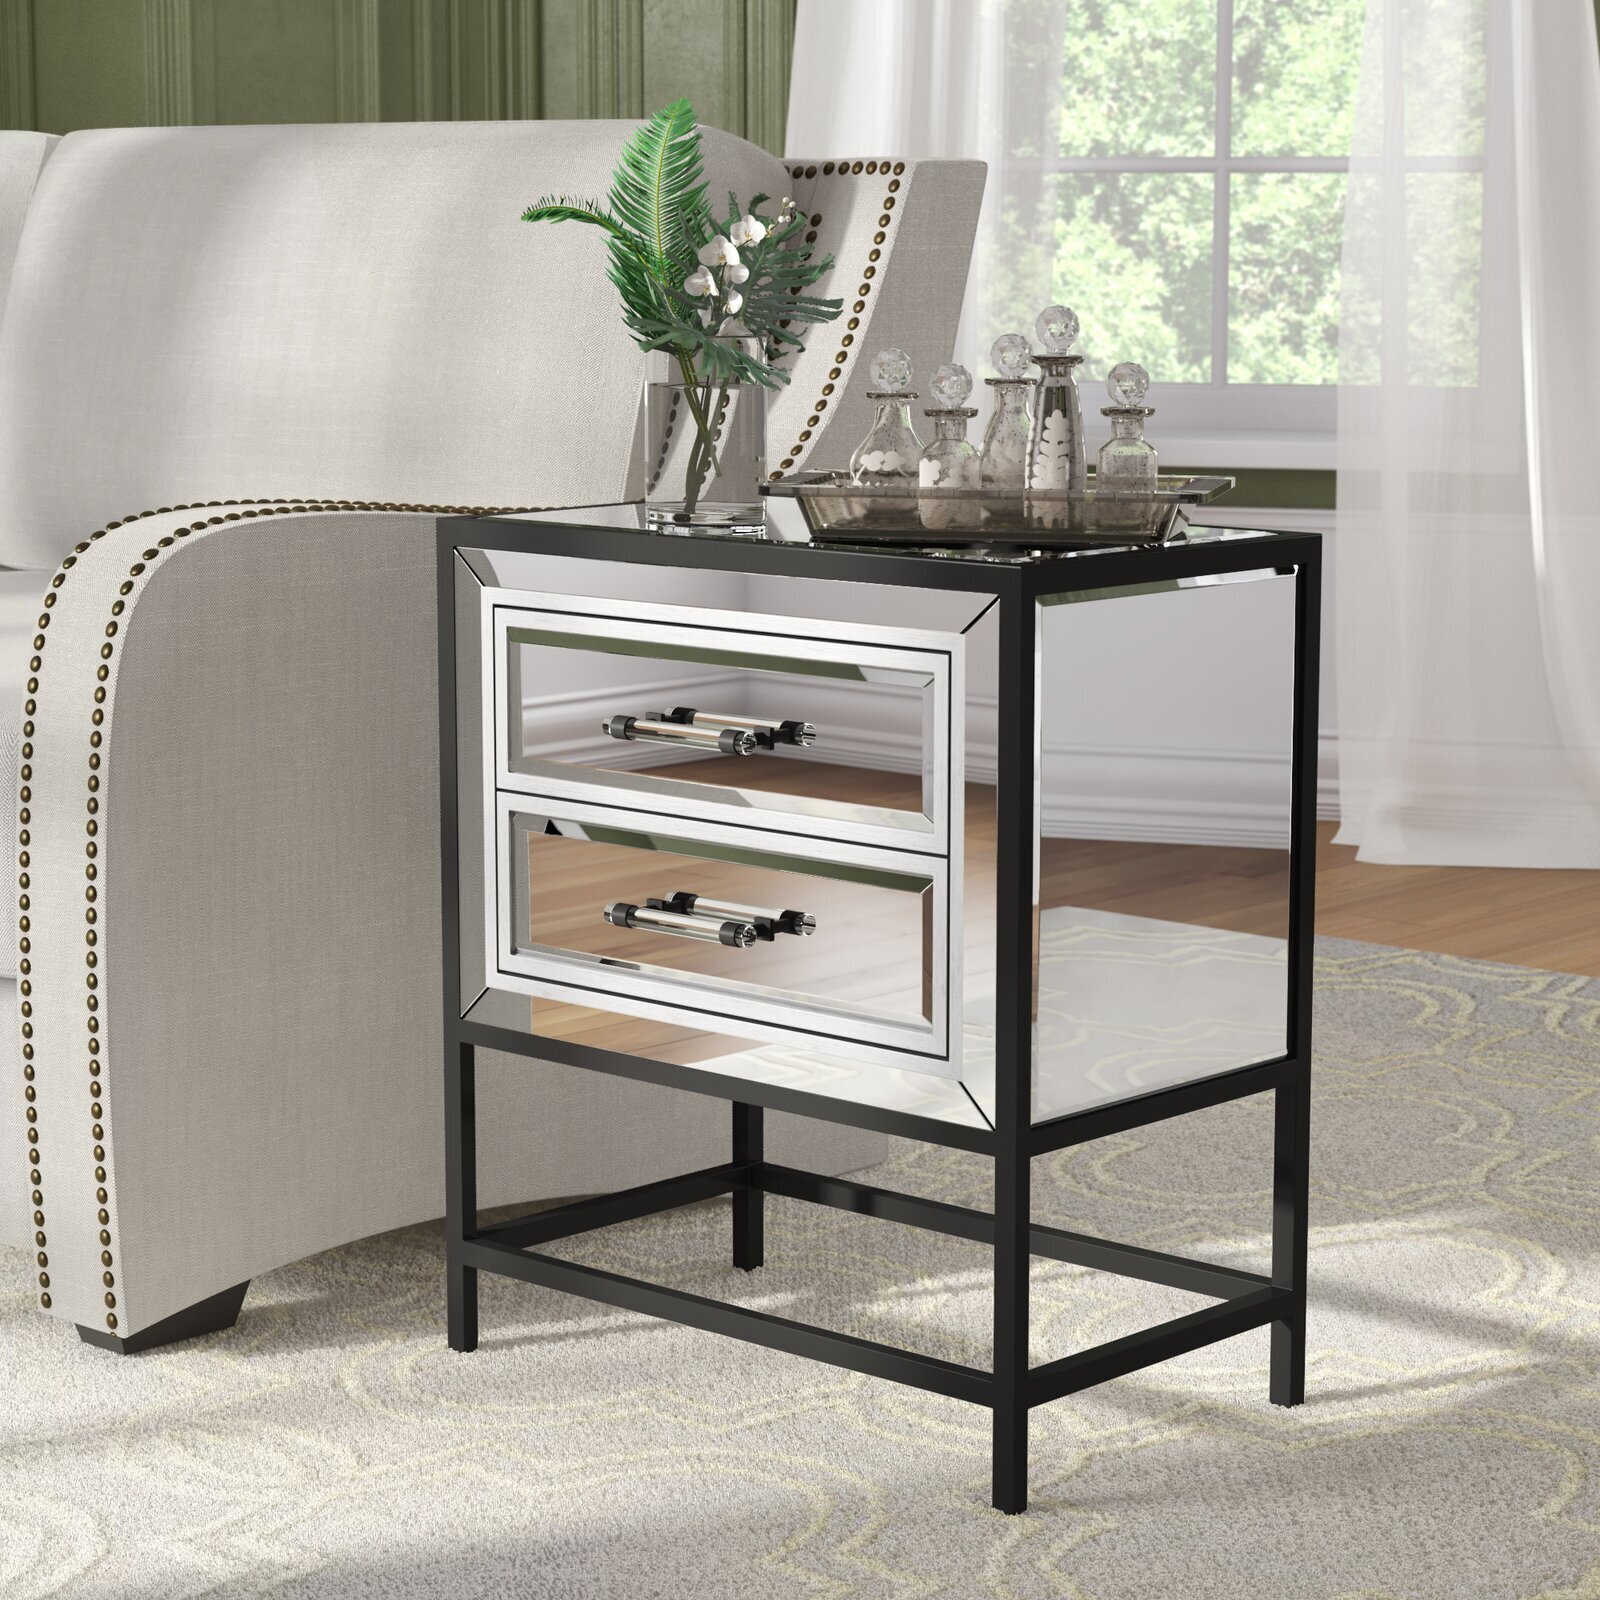 Black Framed Mirrored Table with Drawers